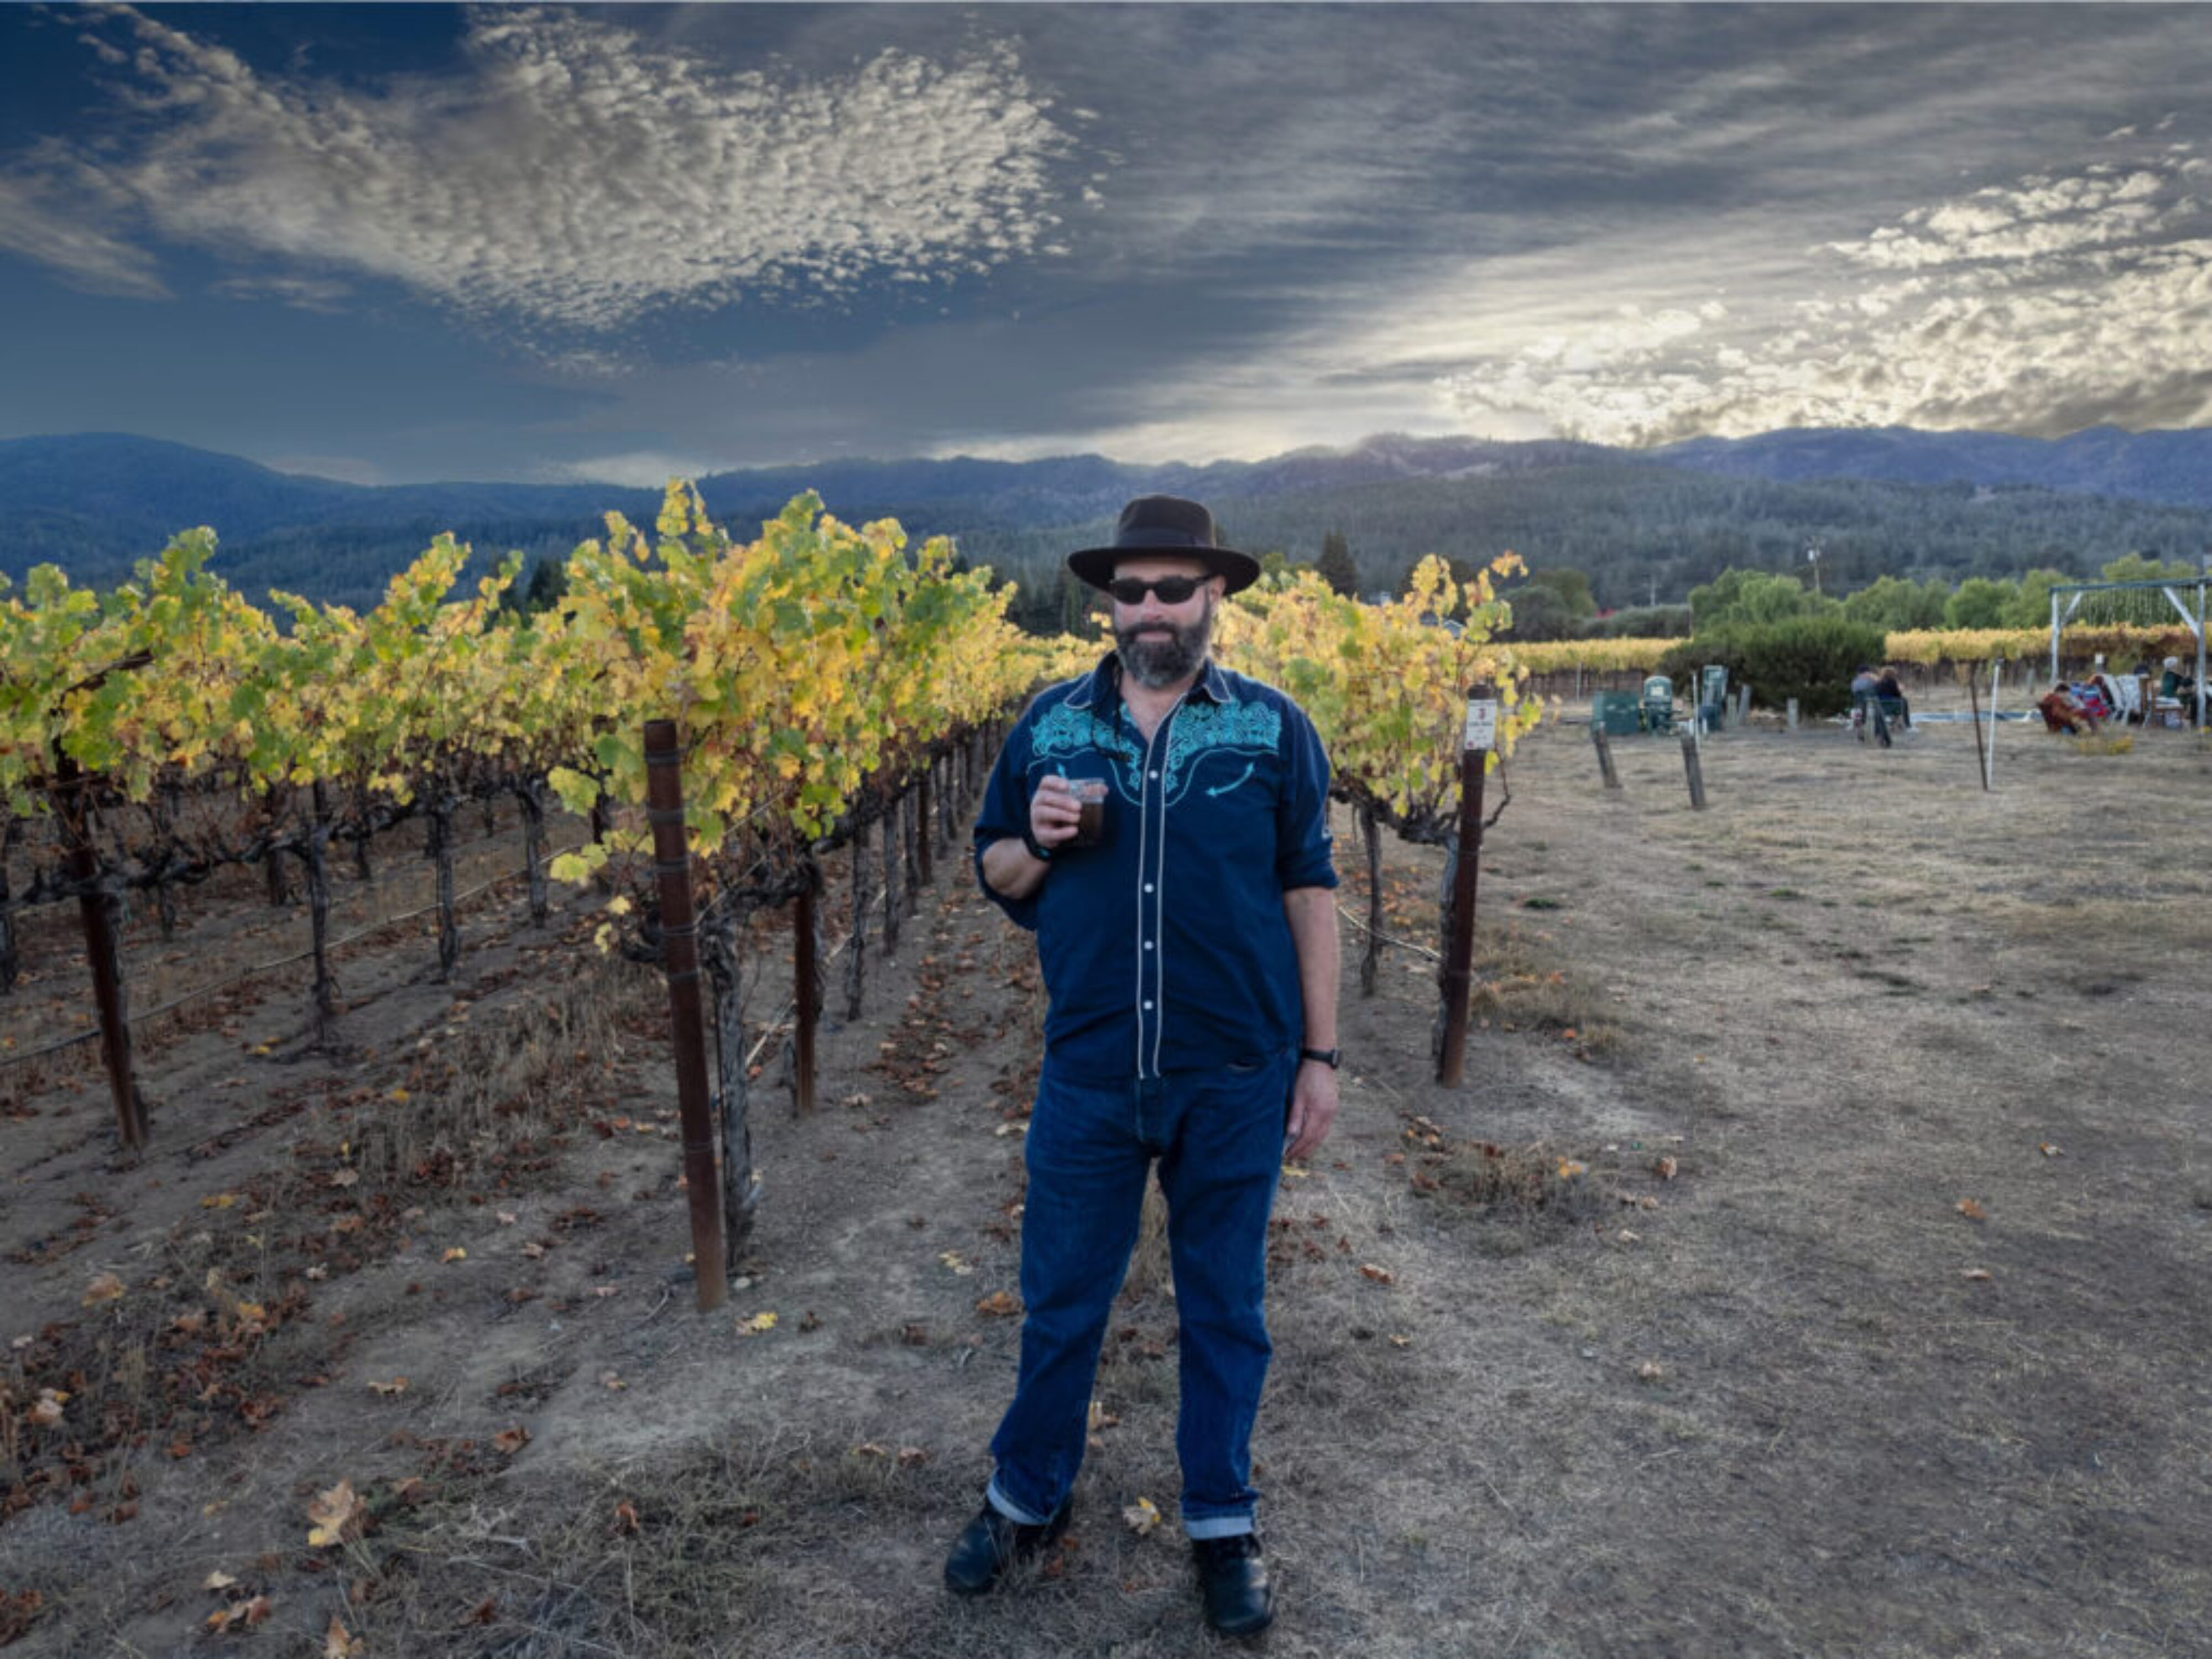 Vince living large at a private event in Napa, CA-Fall of 2023 Image courtesy of alanzuckerphotography.com